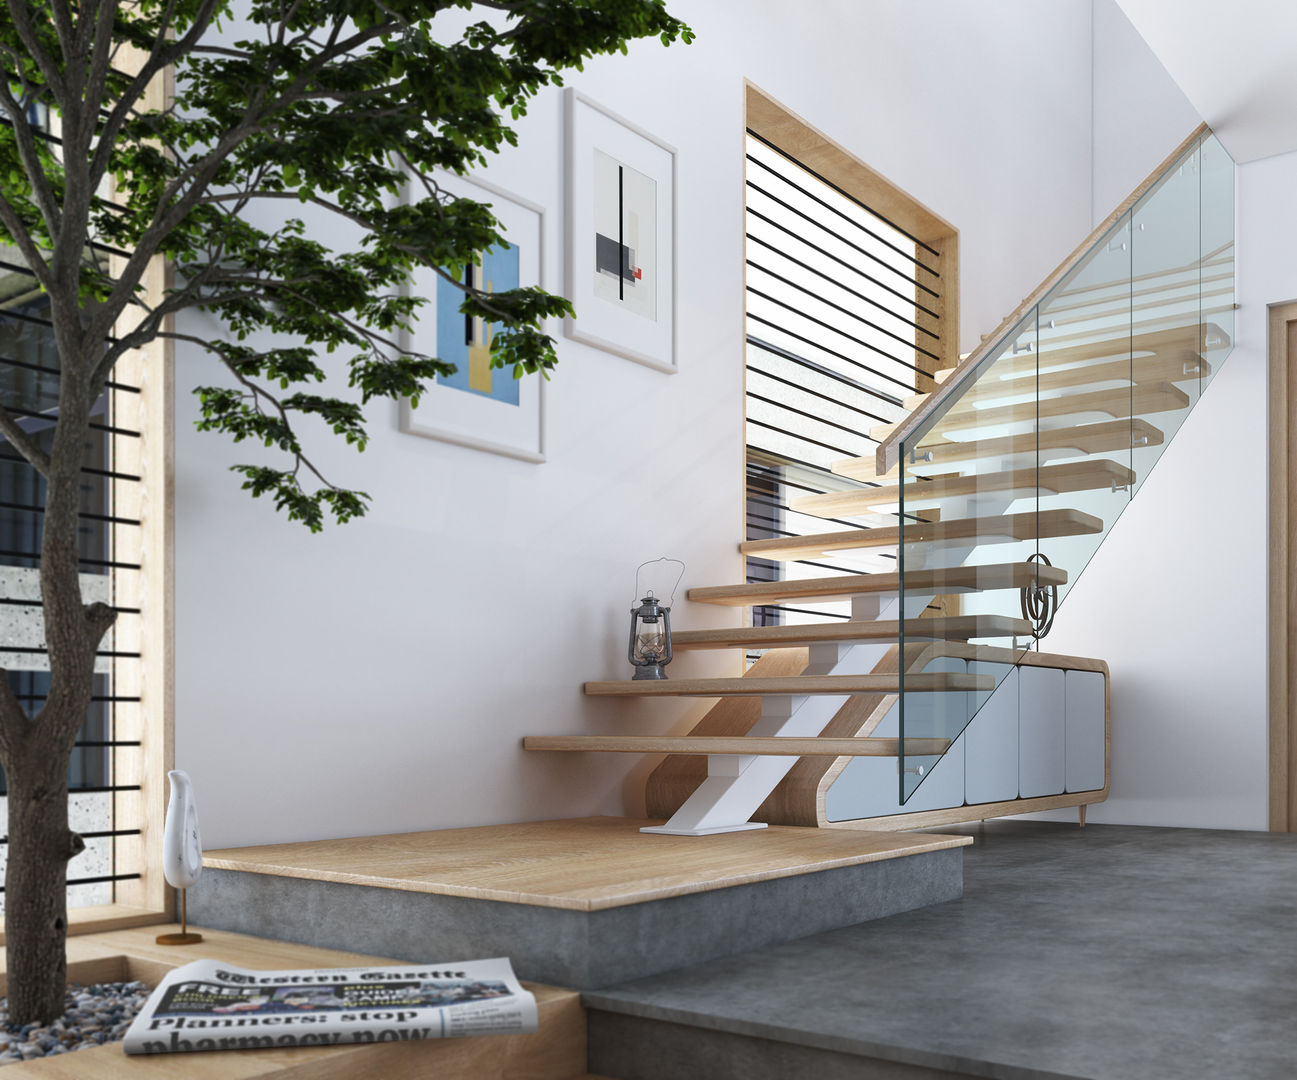 House 516, Studio Gritt Studio Gritt Stairs Building,Plant,Stairs,Fixture,Wood,Urban design,Composite material,House,Real estate,Wood stain